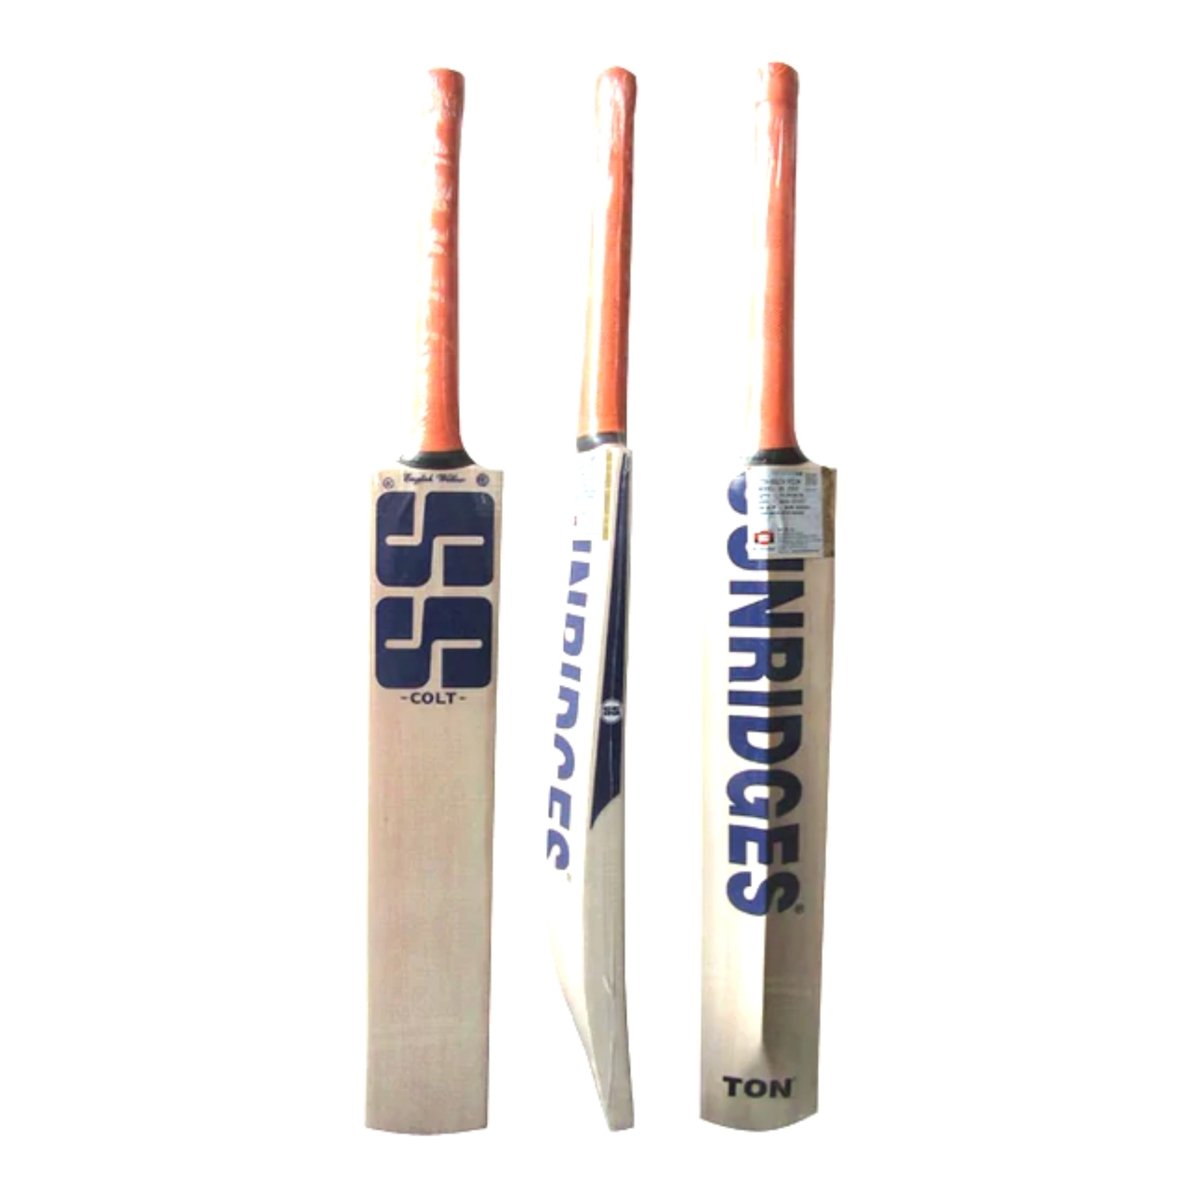 SS Colt Youth English Willow Cricket Bat.